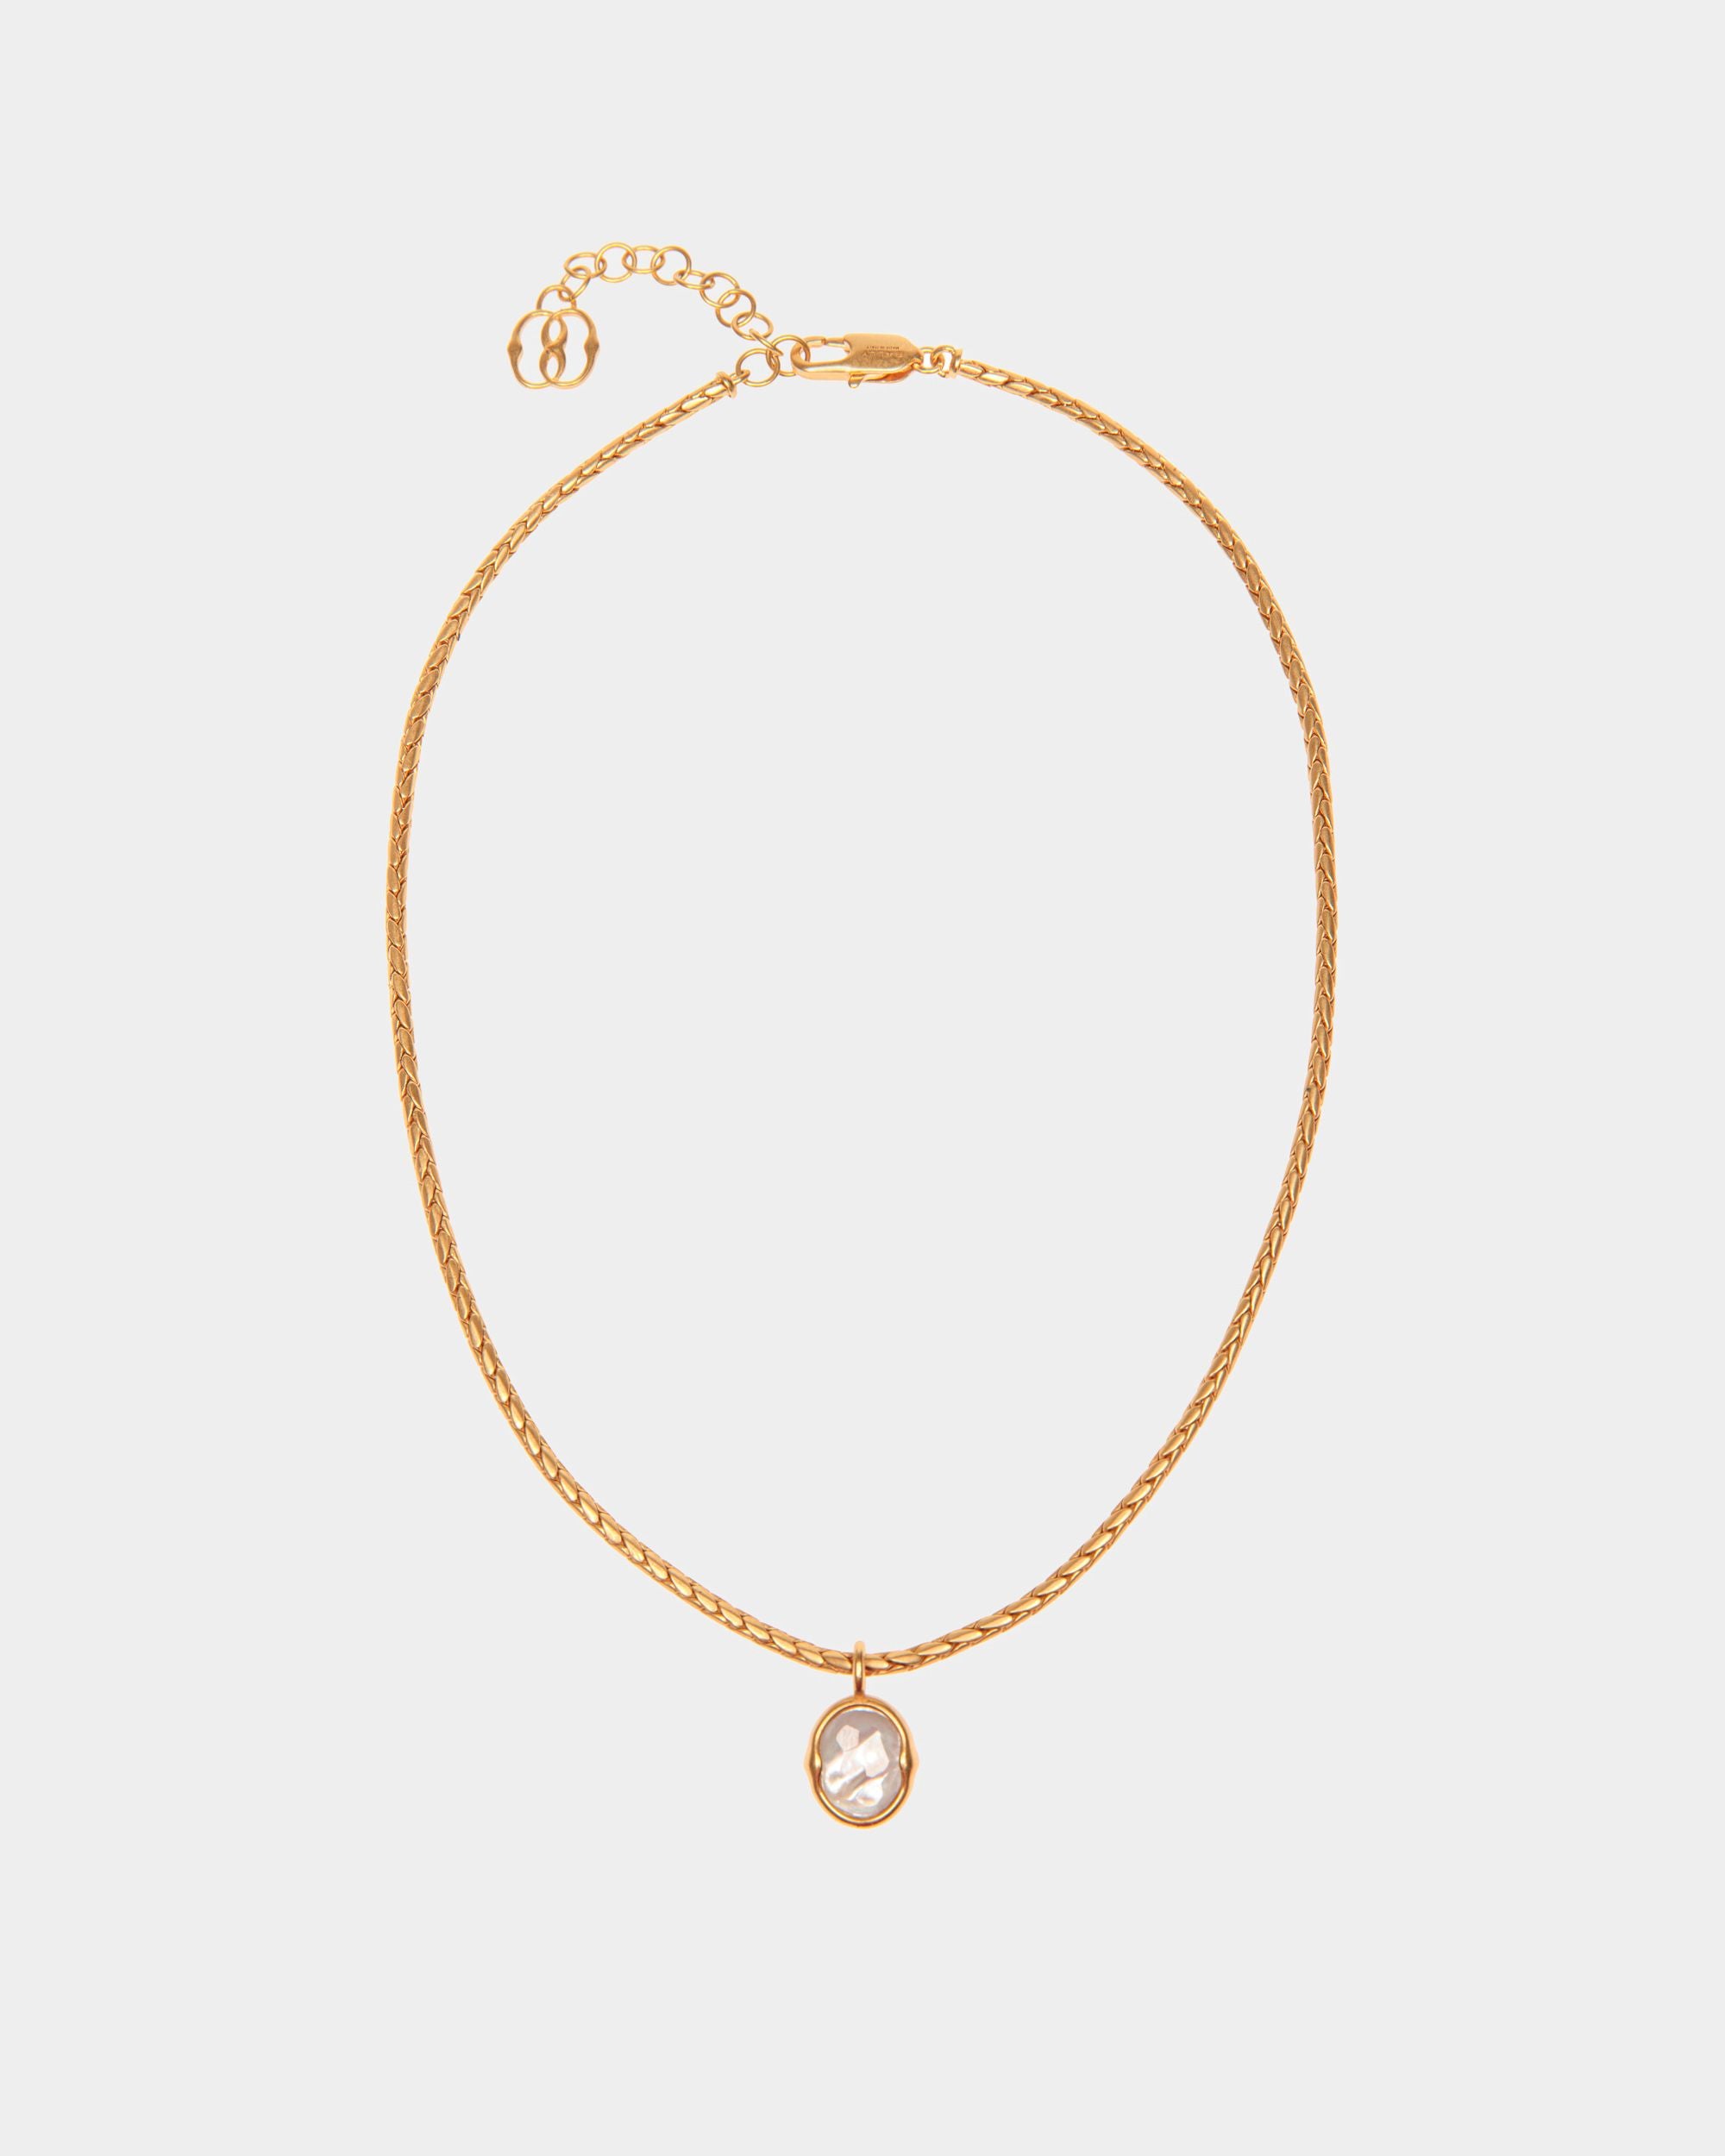 Women's Frame Outline Necklace With A Snake Chain | Bally | Still Life Front